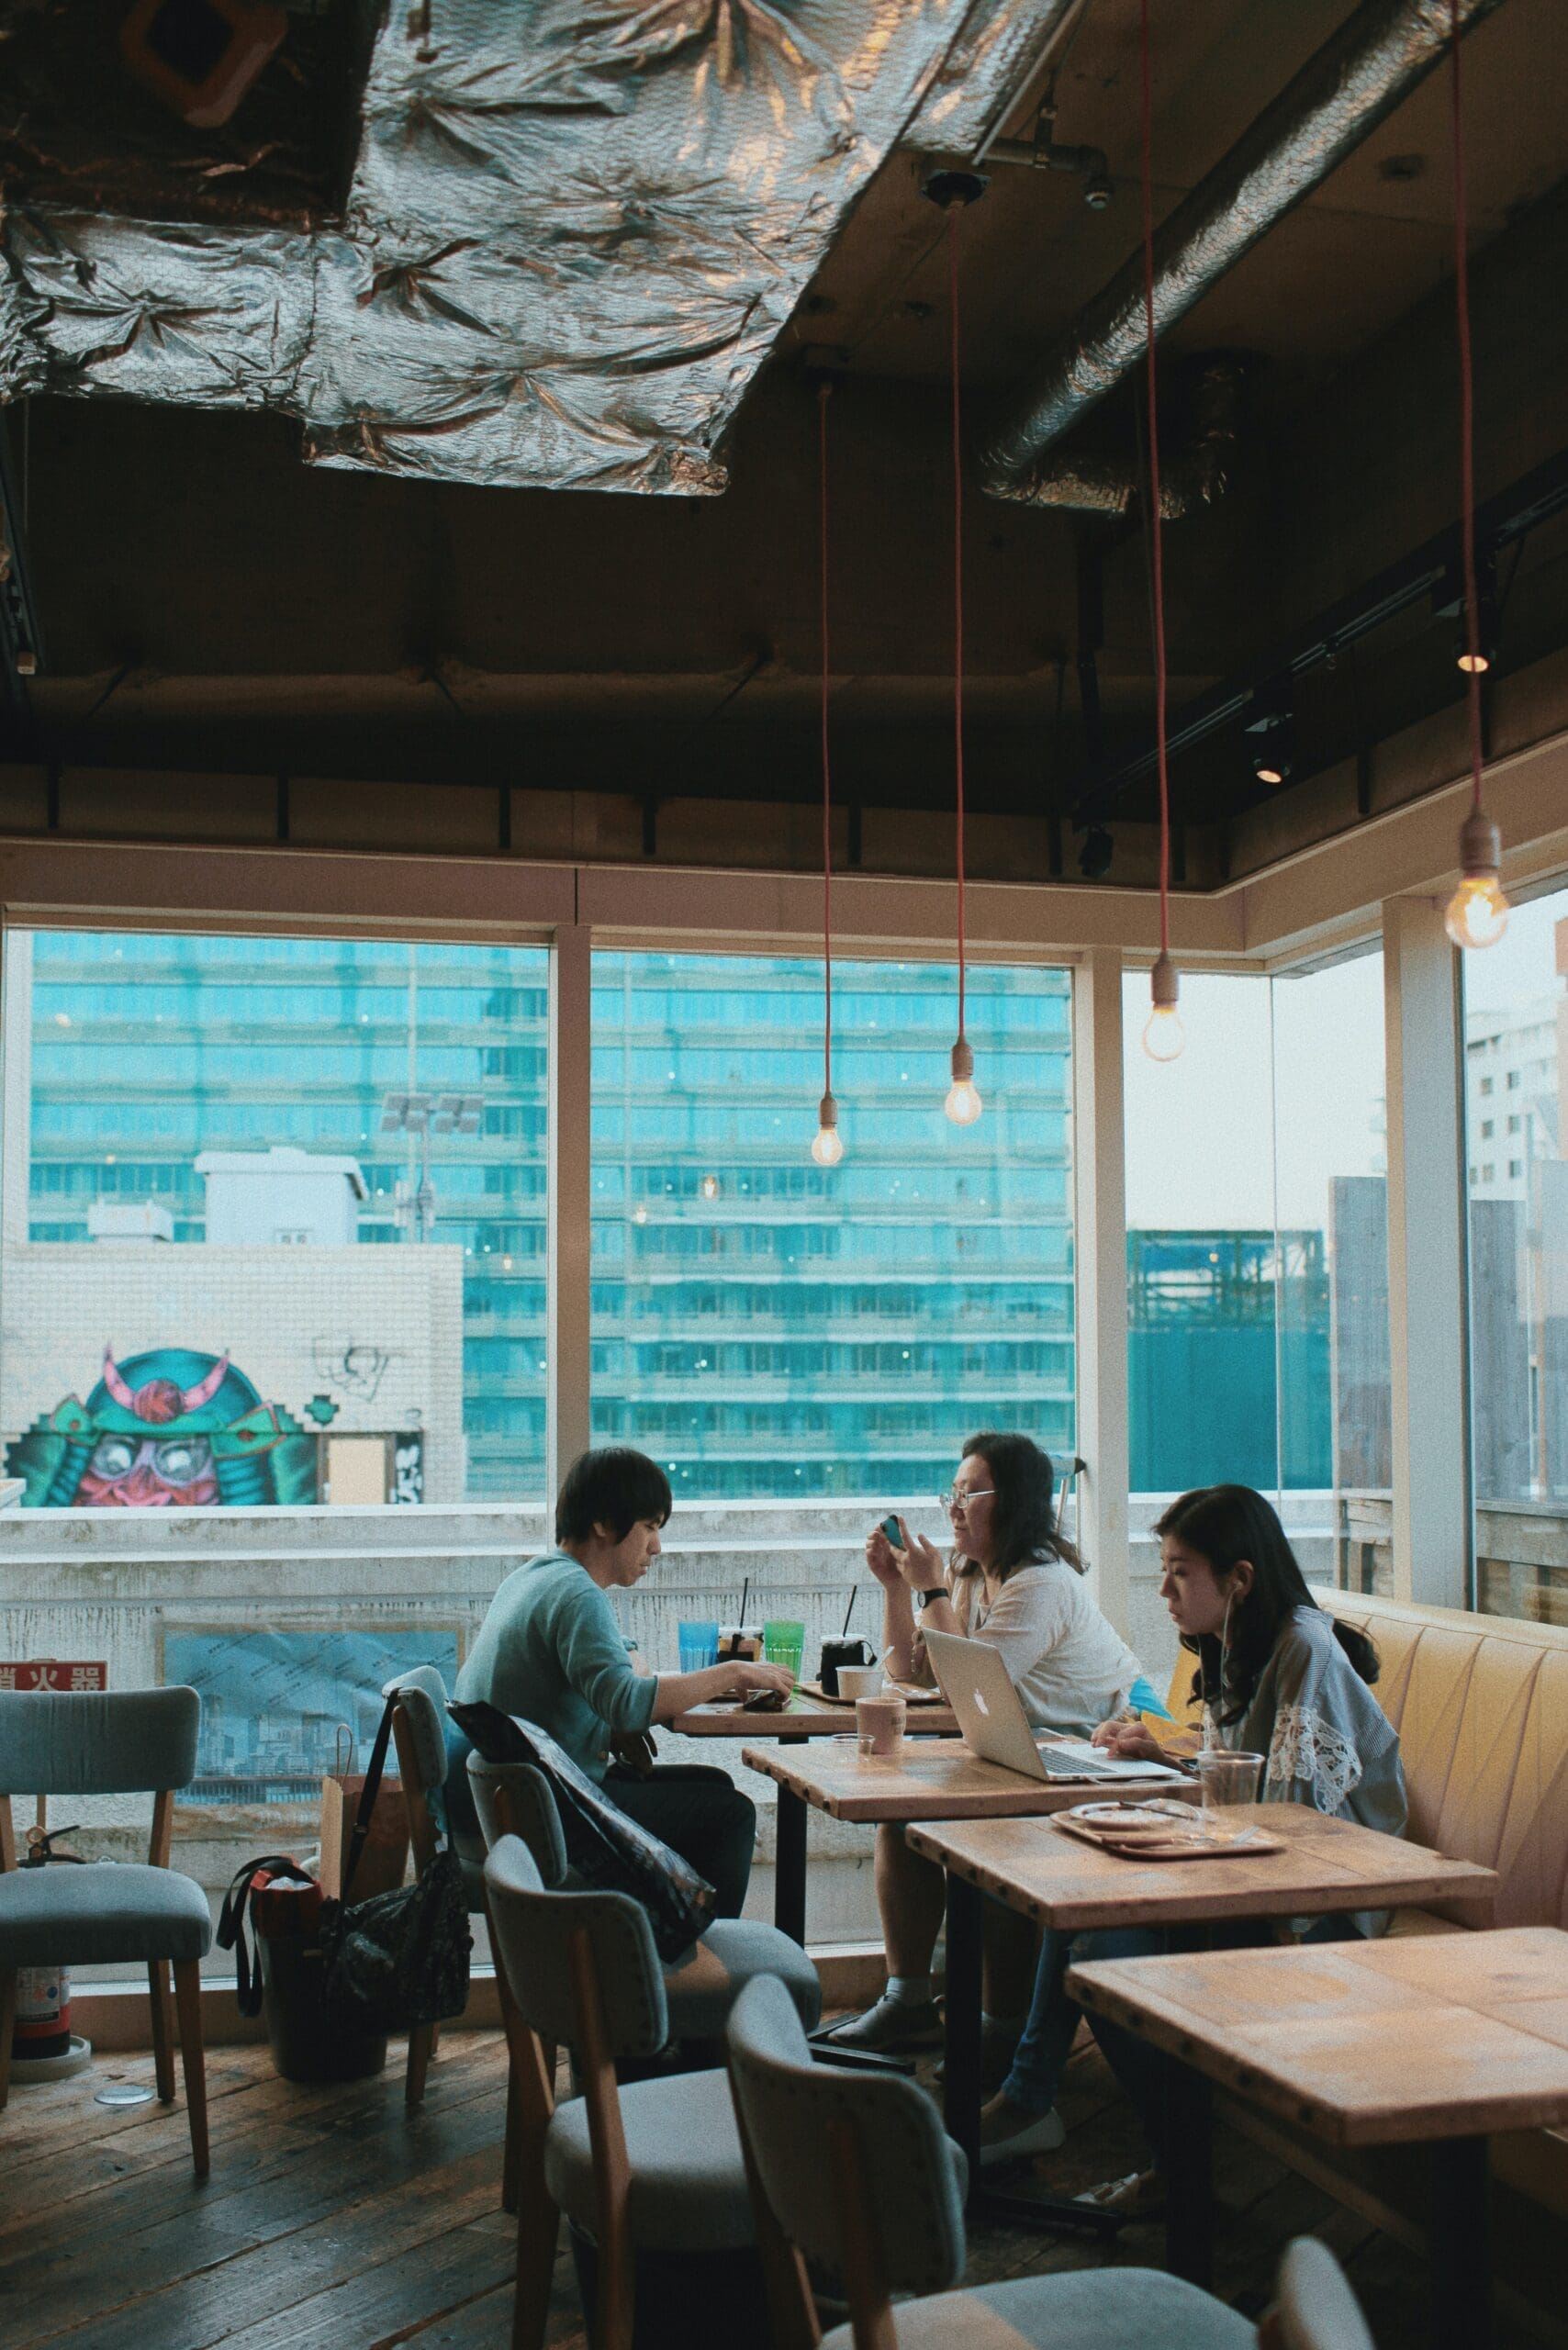 Photo of Japanese people eating in cafeteria by Linh Nguyen for Unsplash